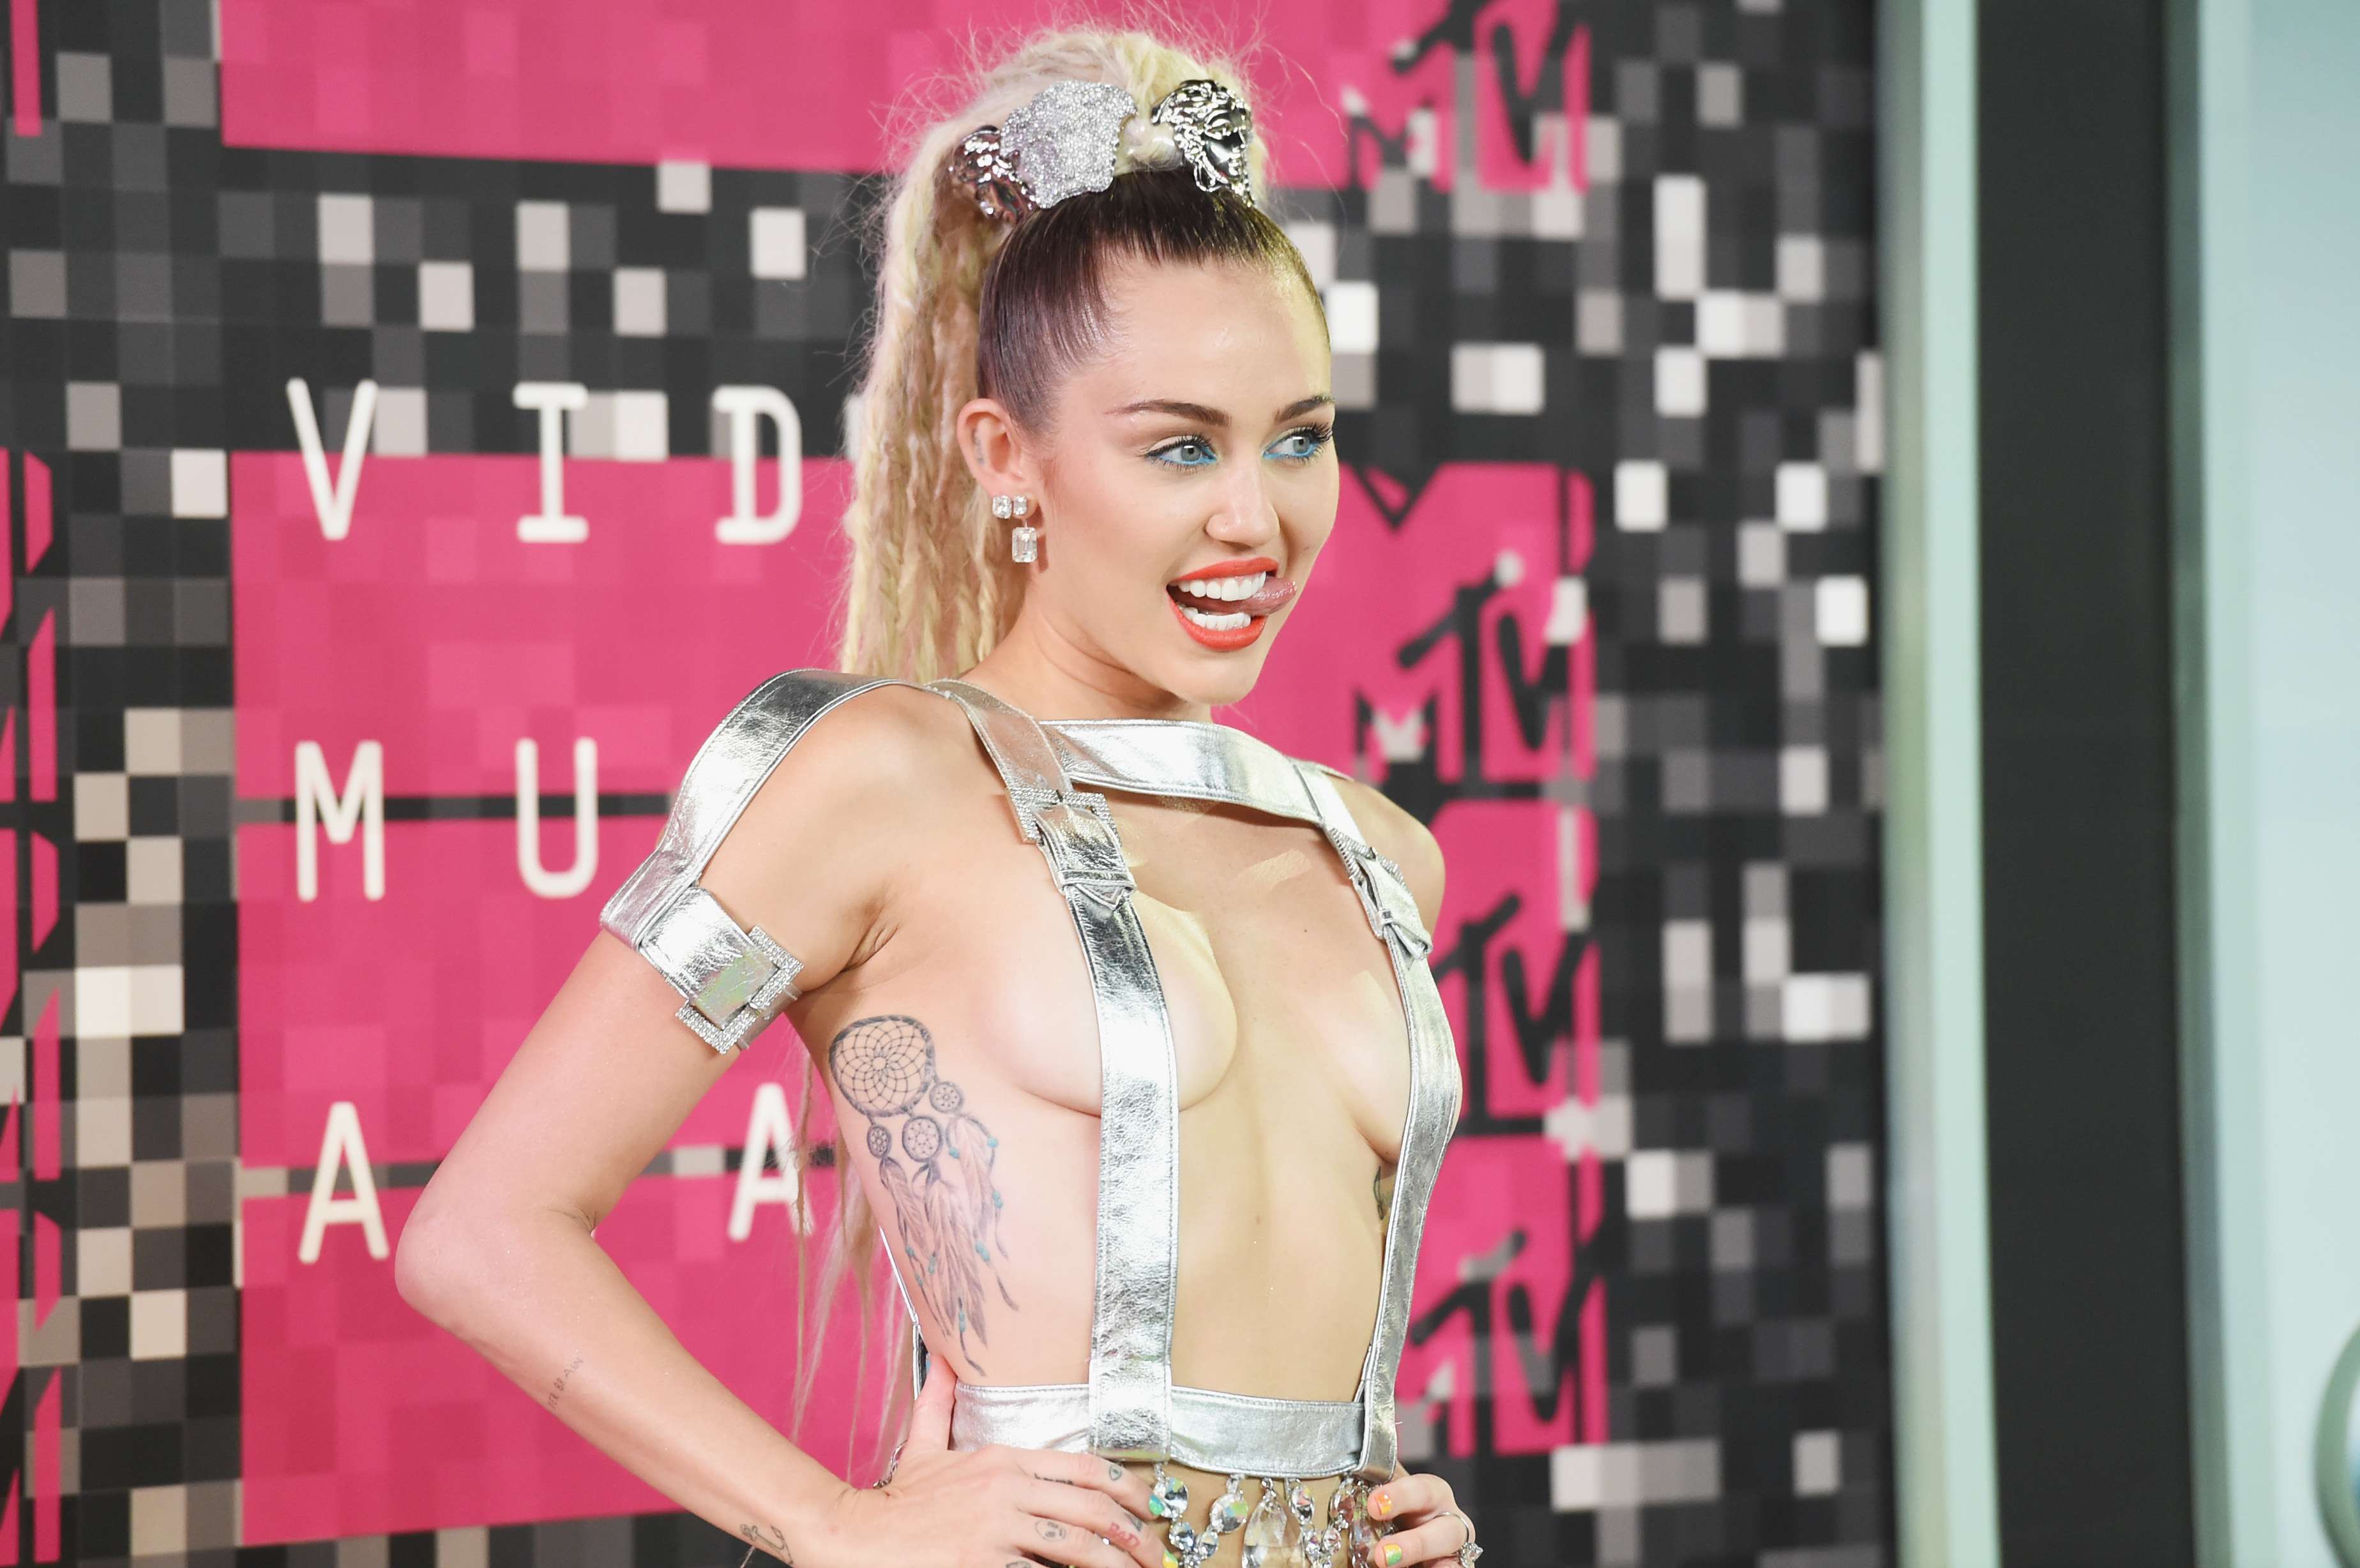 Sexy pics of Miley Cyrus from MTV VMA 2015